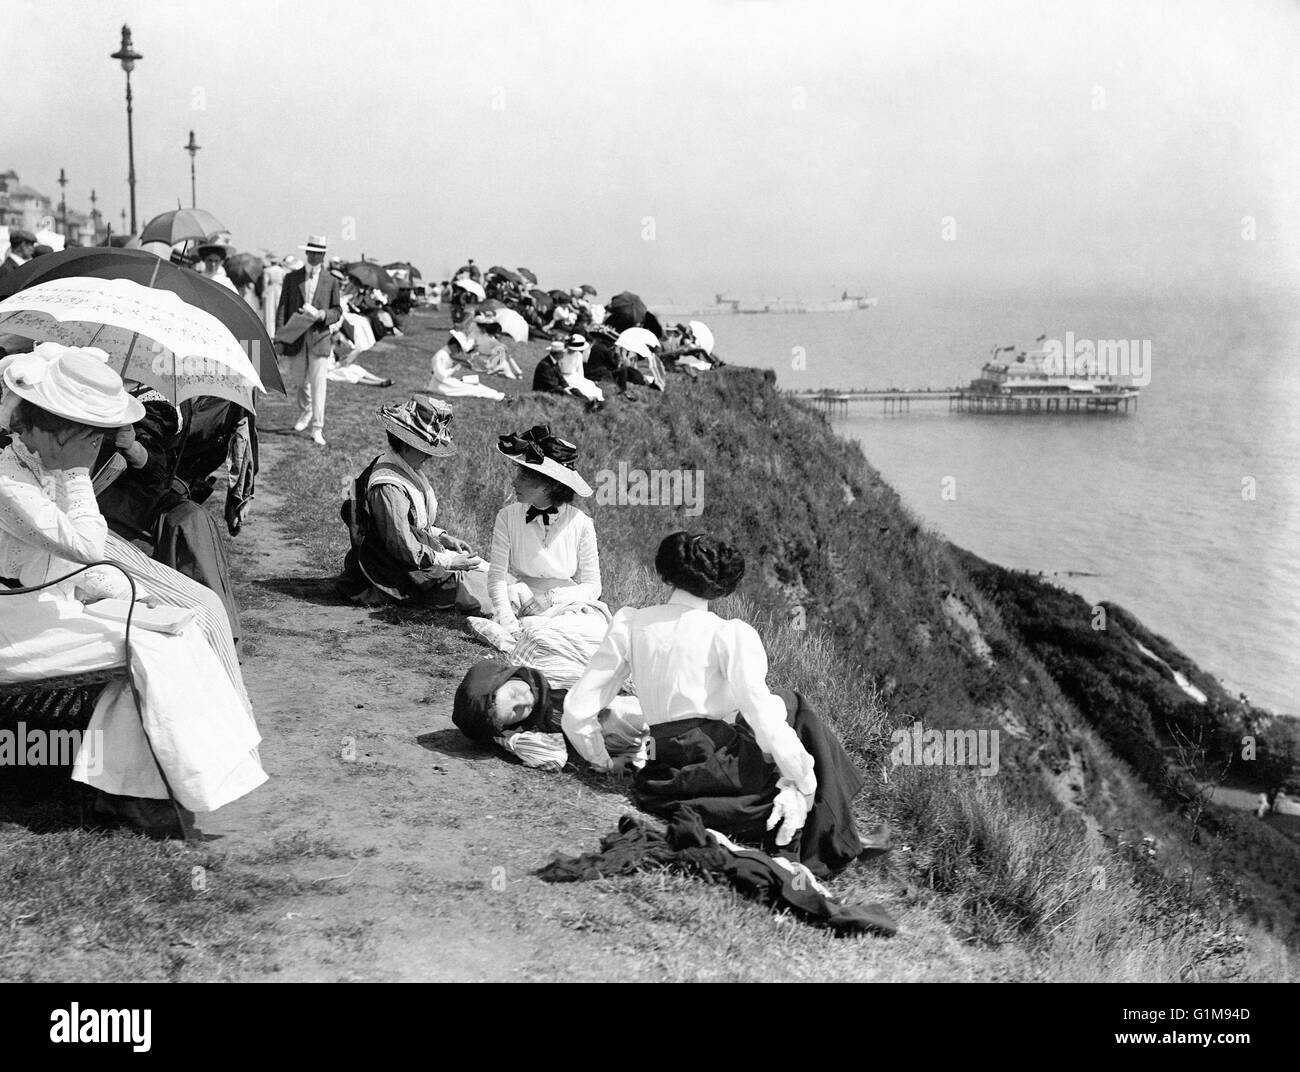 People enjoying the sun on the cliffs near the seaside at Folkestone in Kent. ... Summer Weather - British Holidays - The Seaside - Folkestone - 1909 ... 01-07-1909 ... Folkestone ... UK ... Photo credit should read: PA/Unique Reference No. 1216102 ... Stock Photo